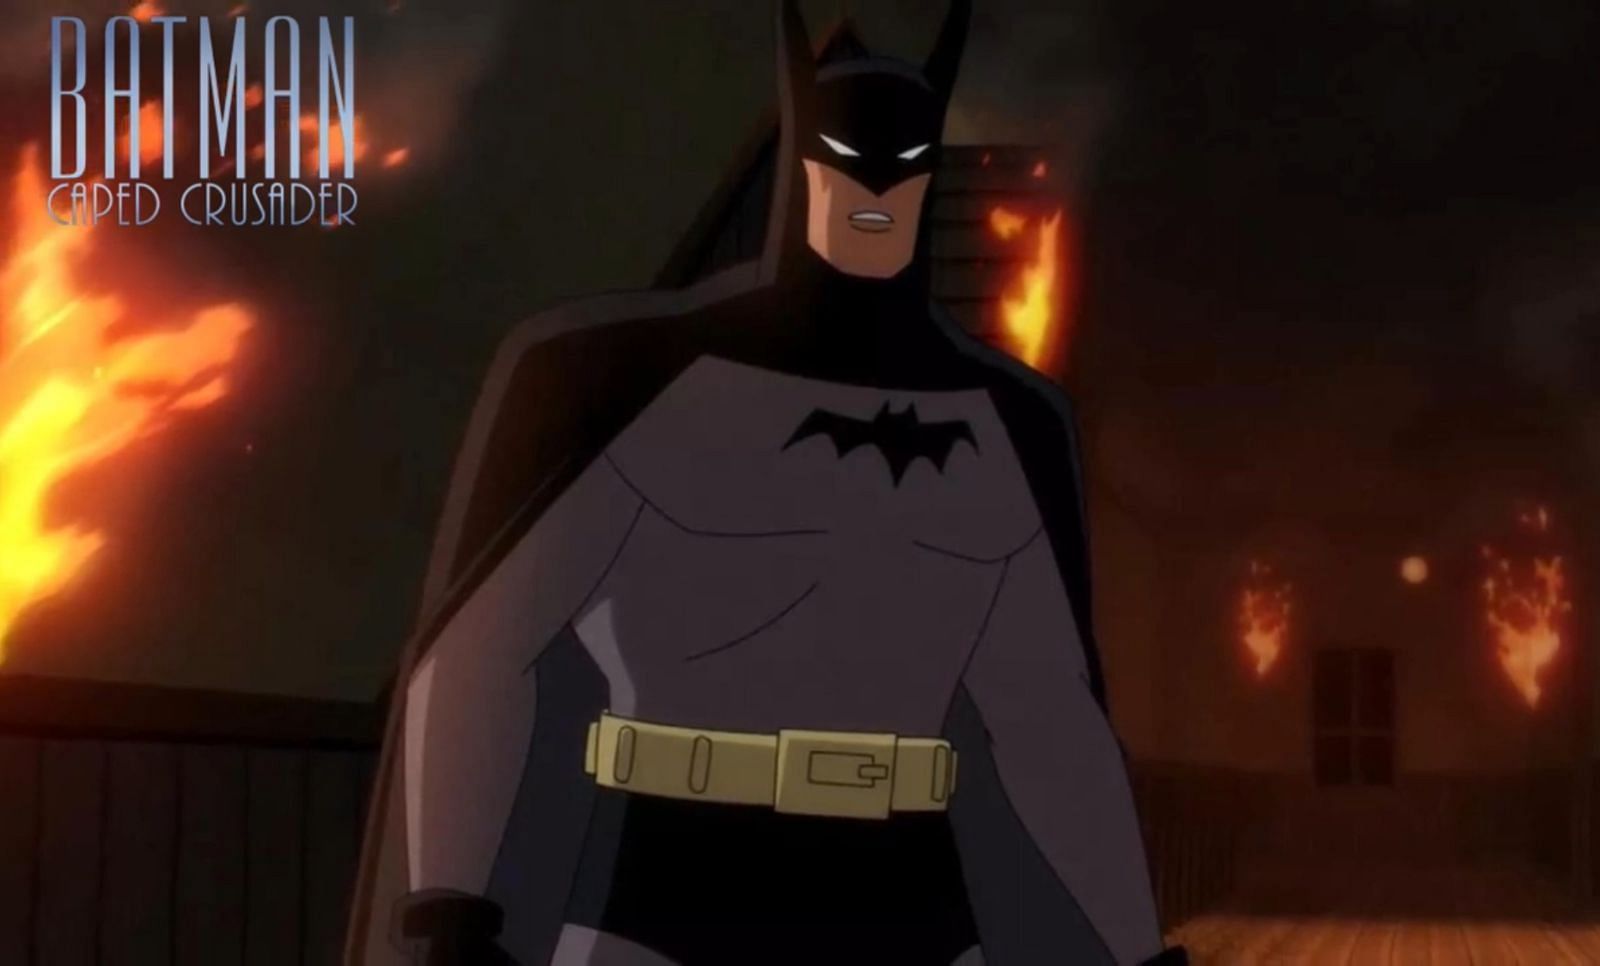 Batman: Caped Crusader first look (Image by Comic Book Nostalgia)